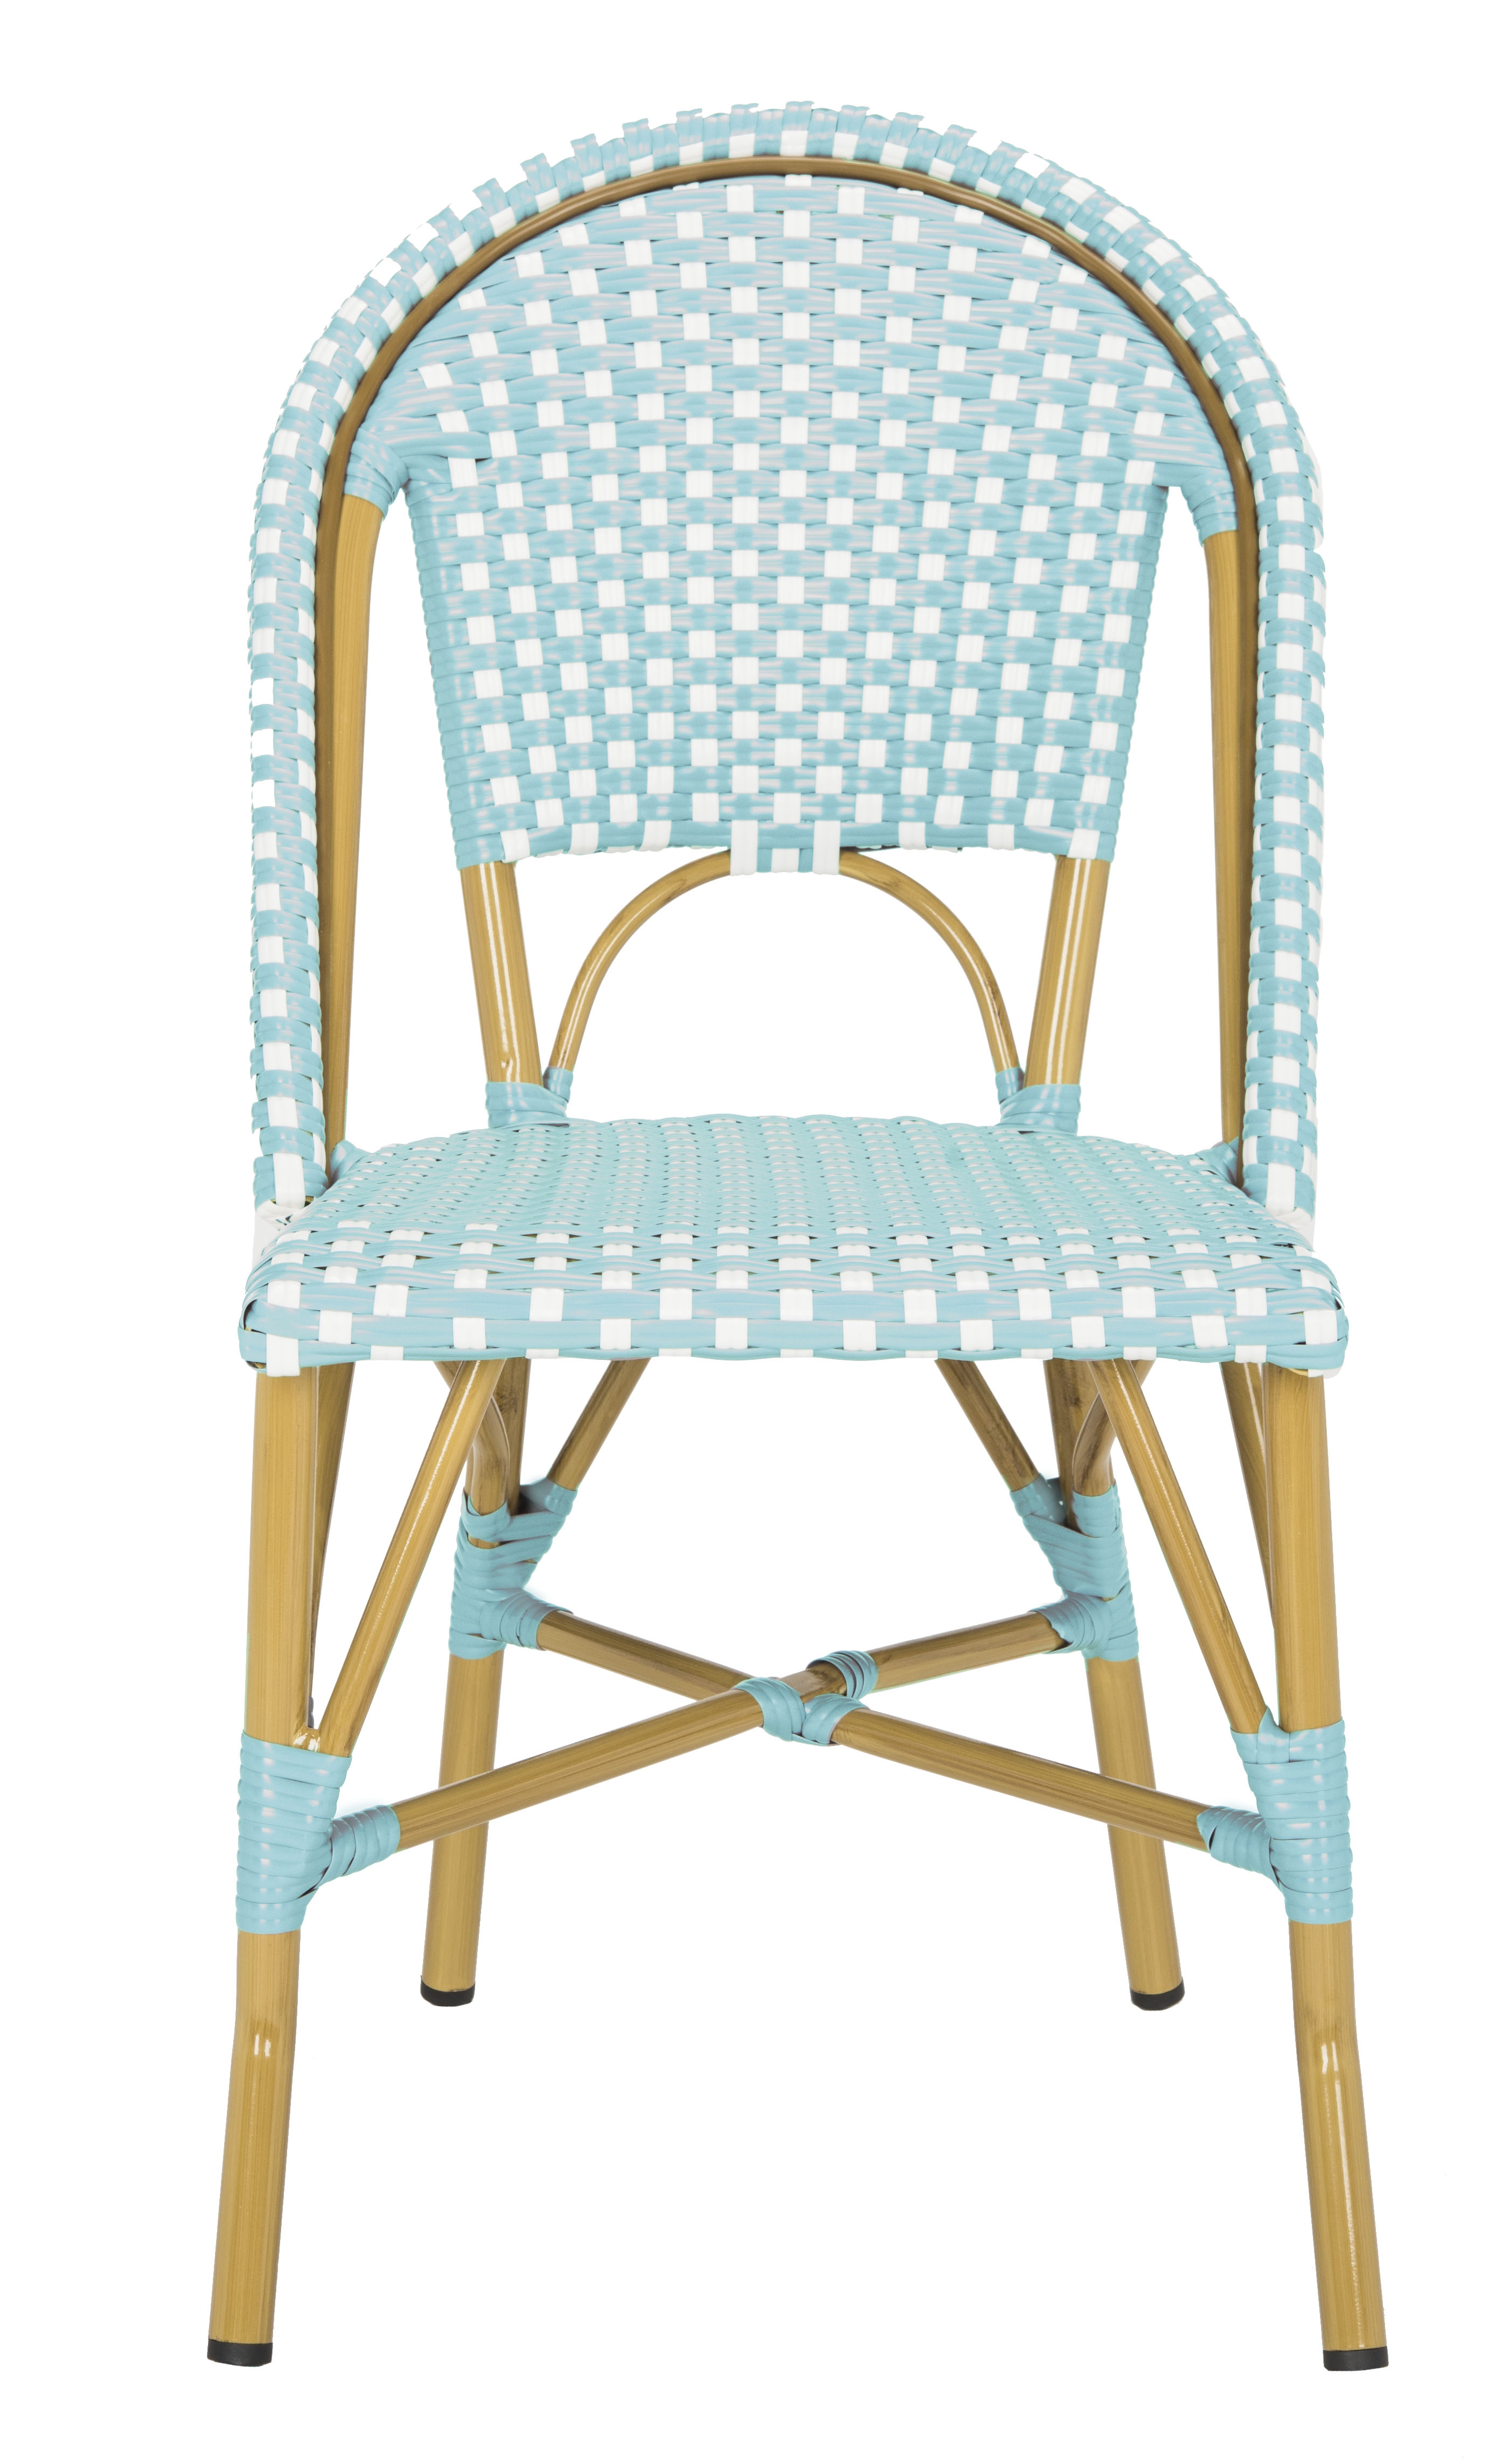 Salcha Indoor-Outdoor French Bistro Stacking Side Chair - Teal/White/Light Brown - Arlo Home - Image 1